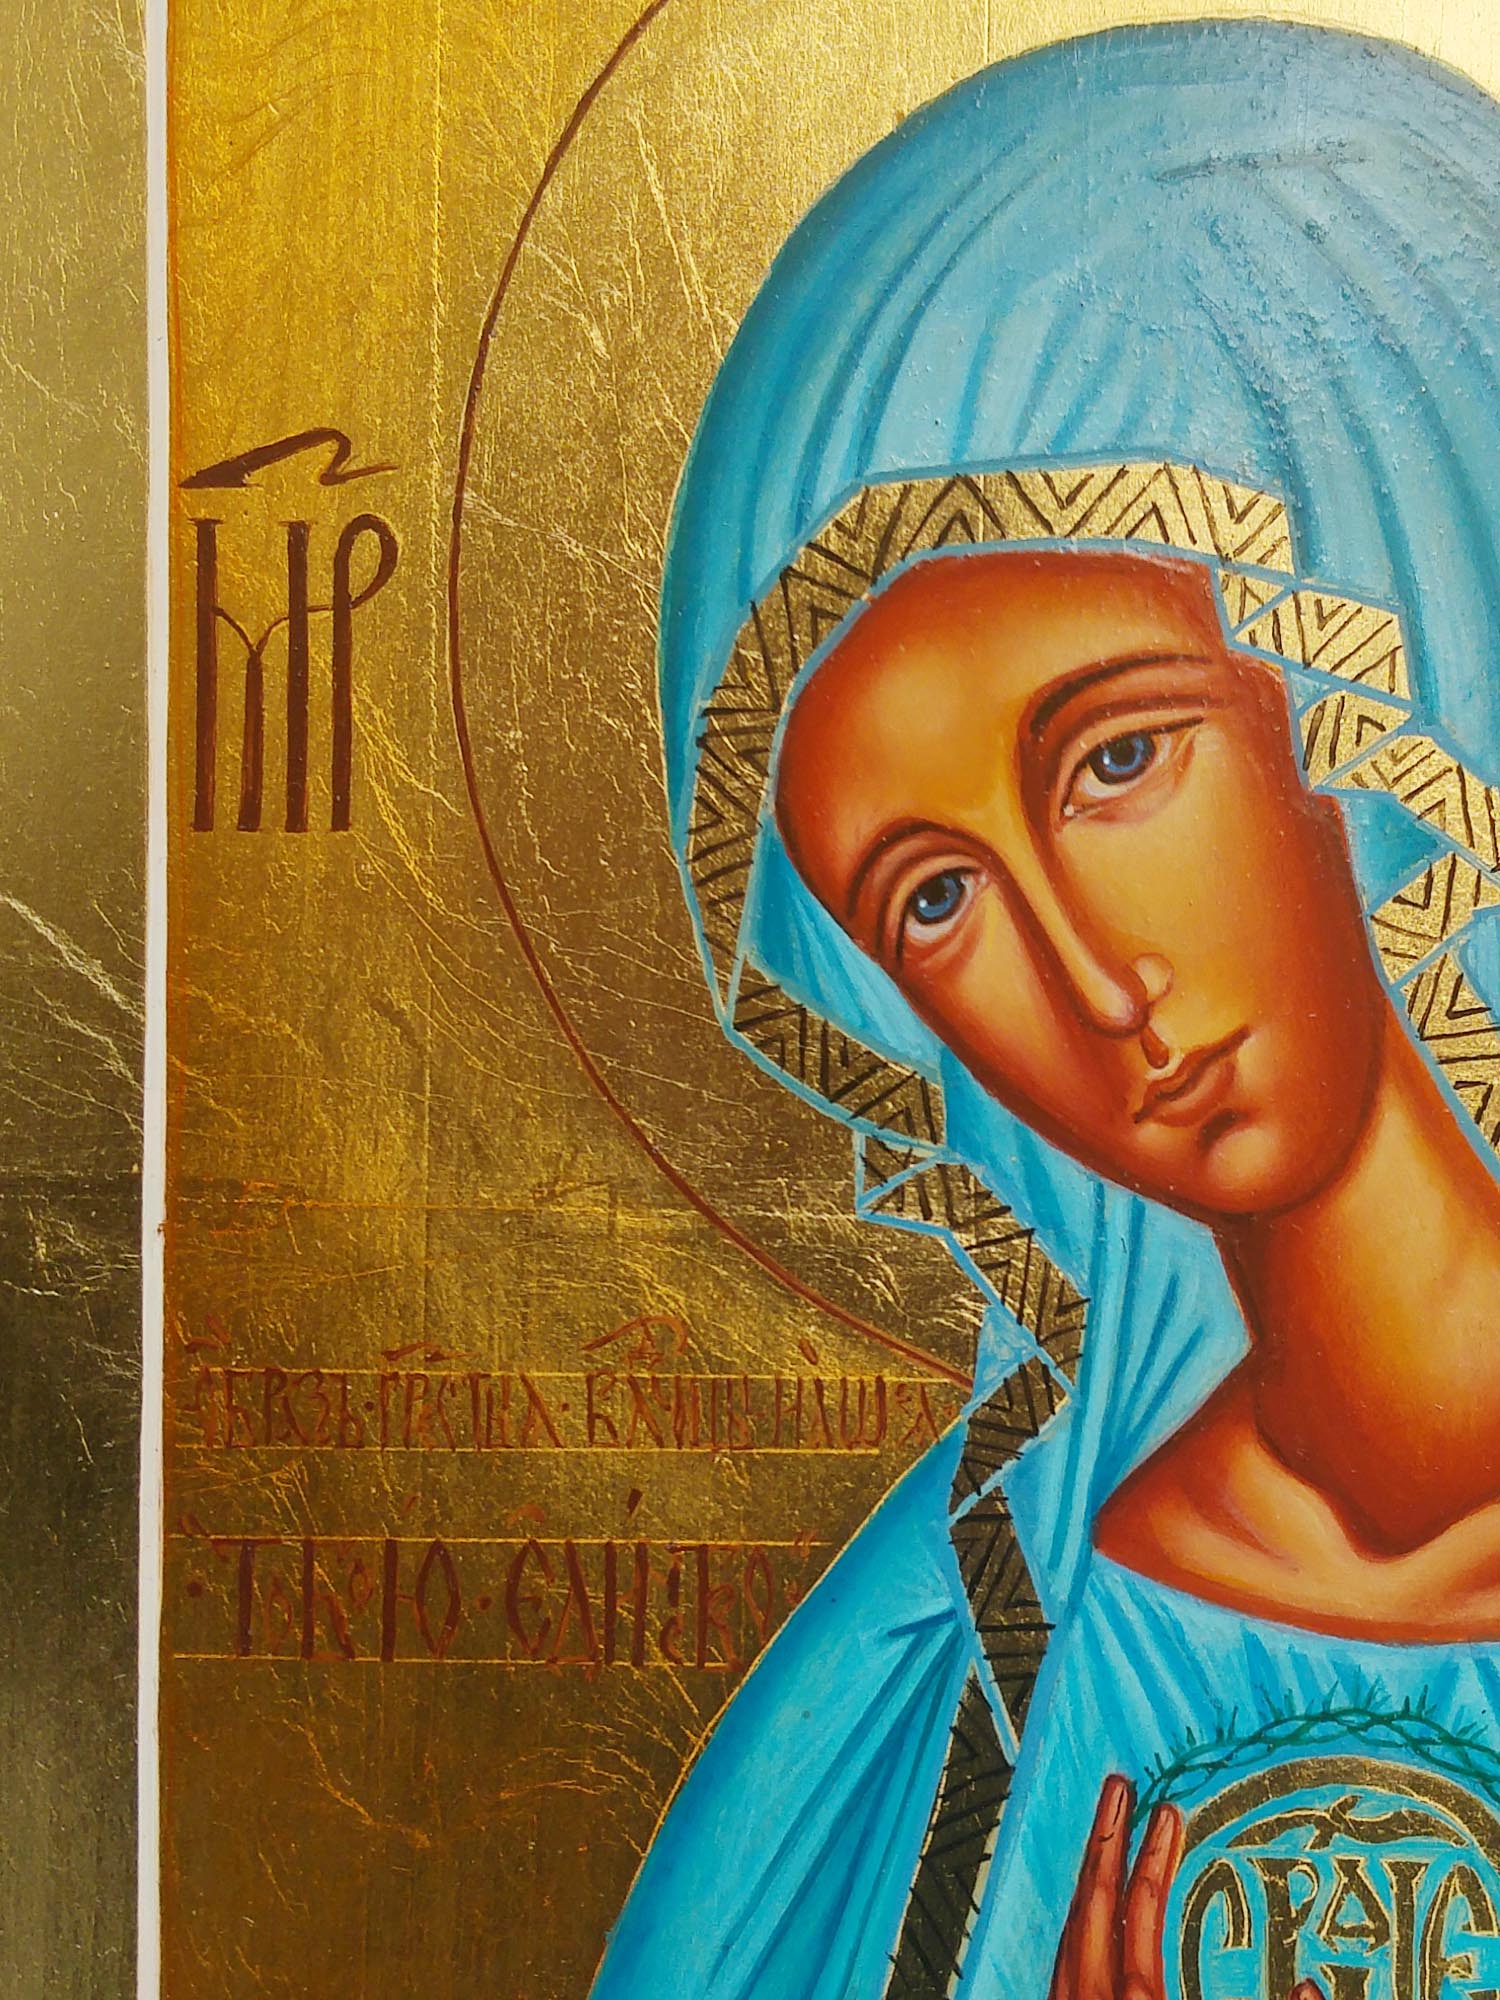 Hand Painted Icon of Our Lady of Fatima